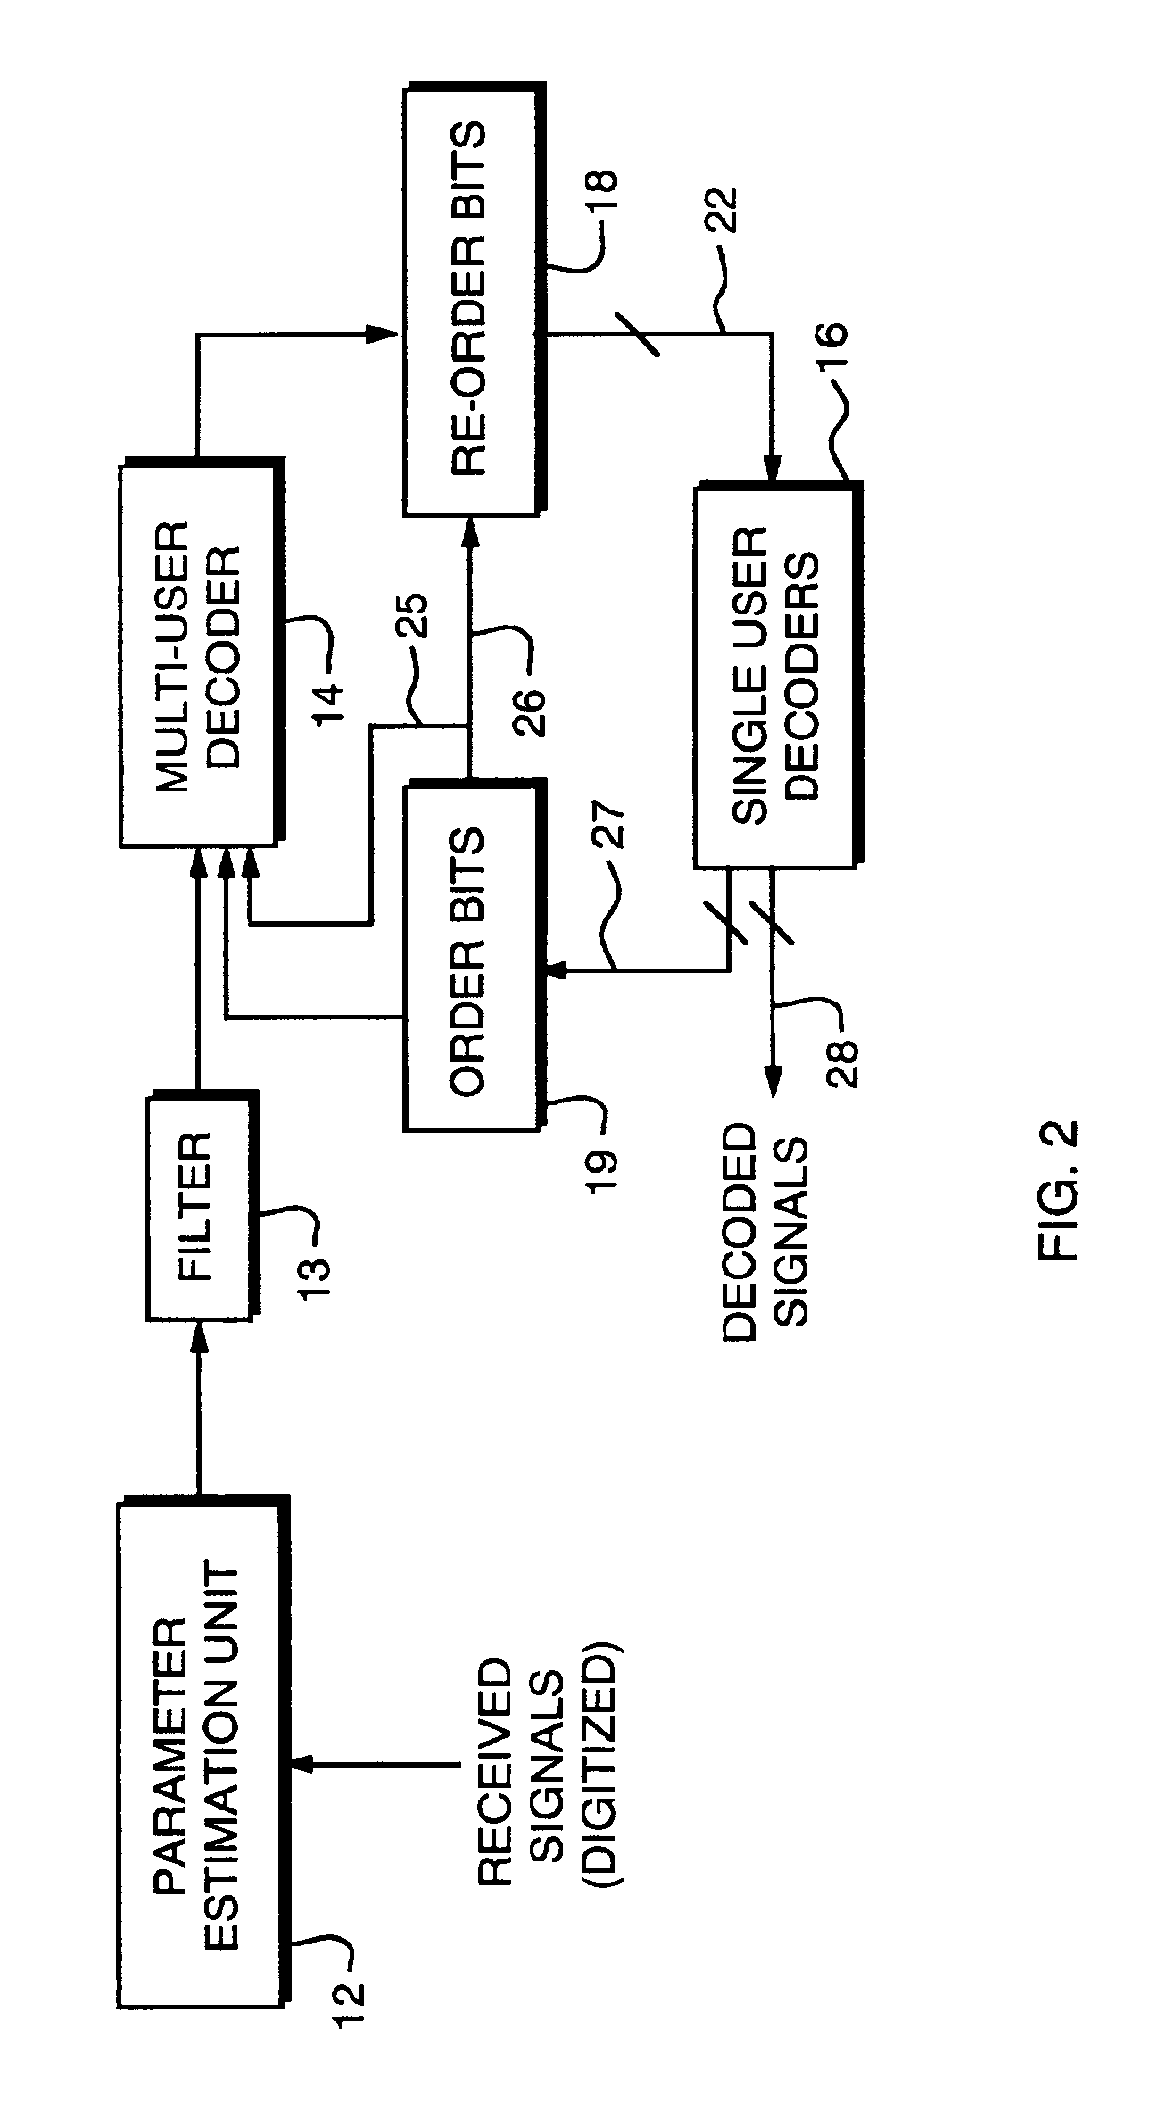 Method and apparatus for improved turbo multiuser detector